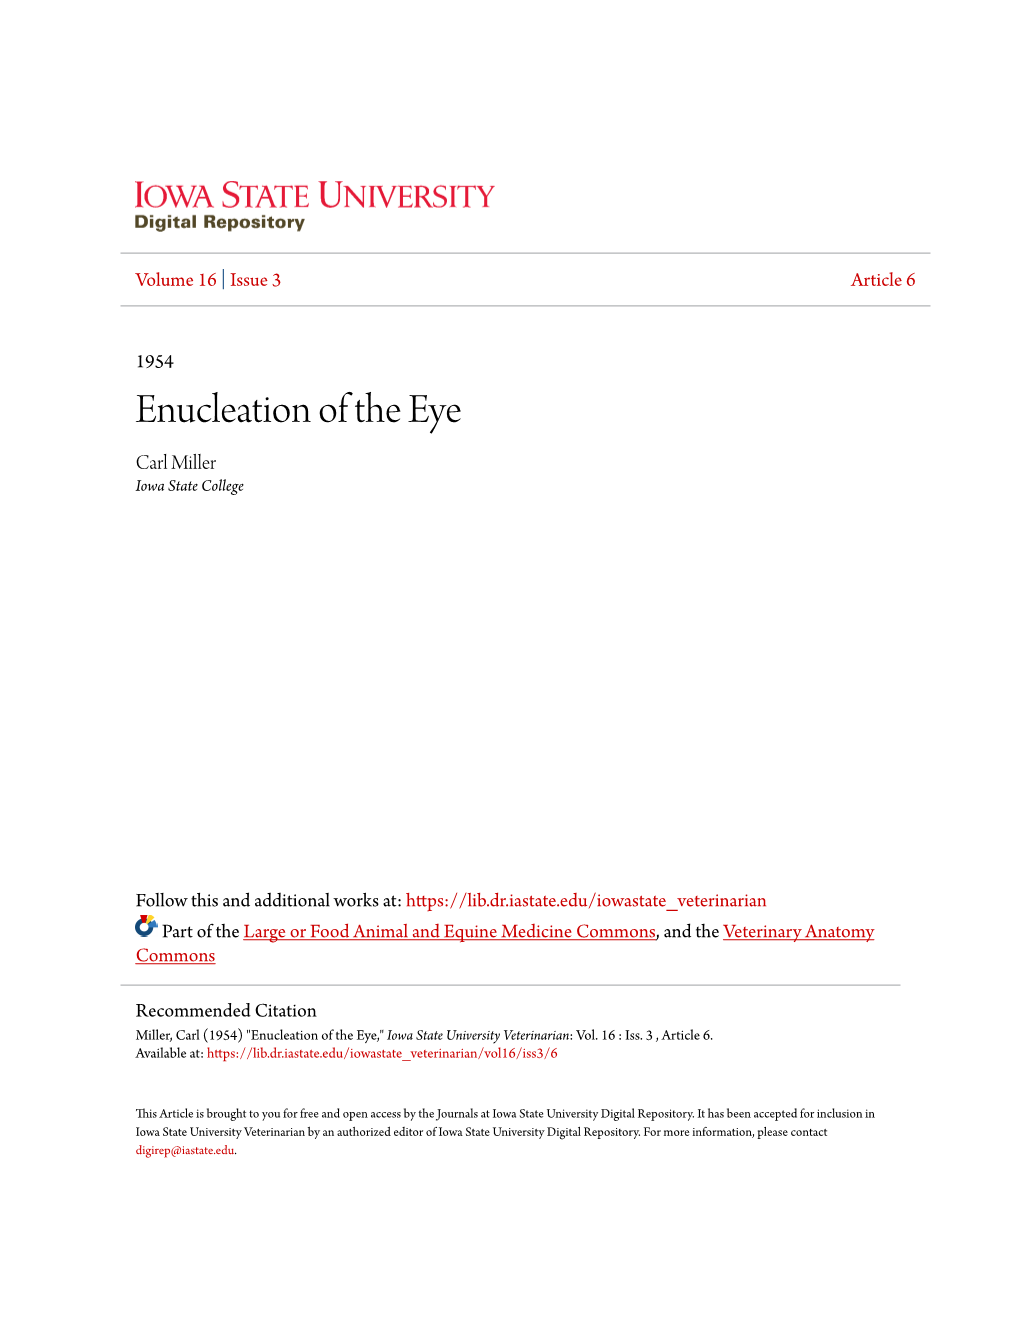 Enucleation of the Eye Carl Miller Iowa State College